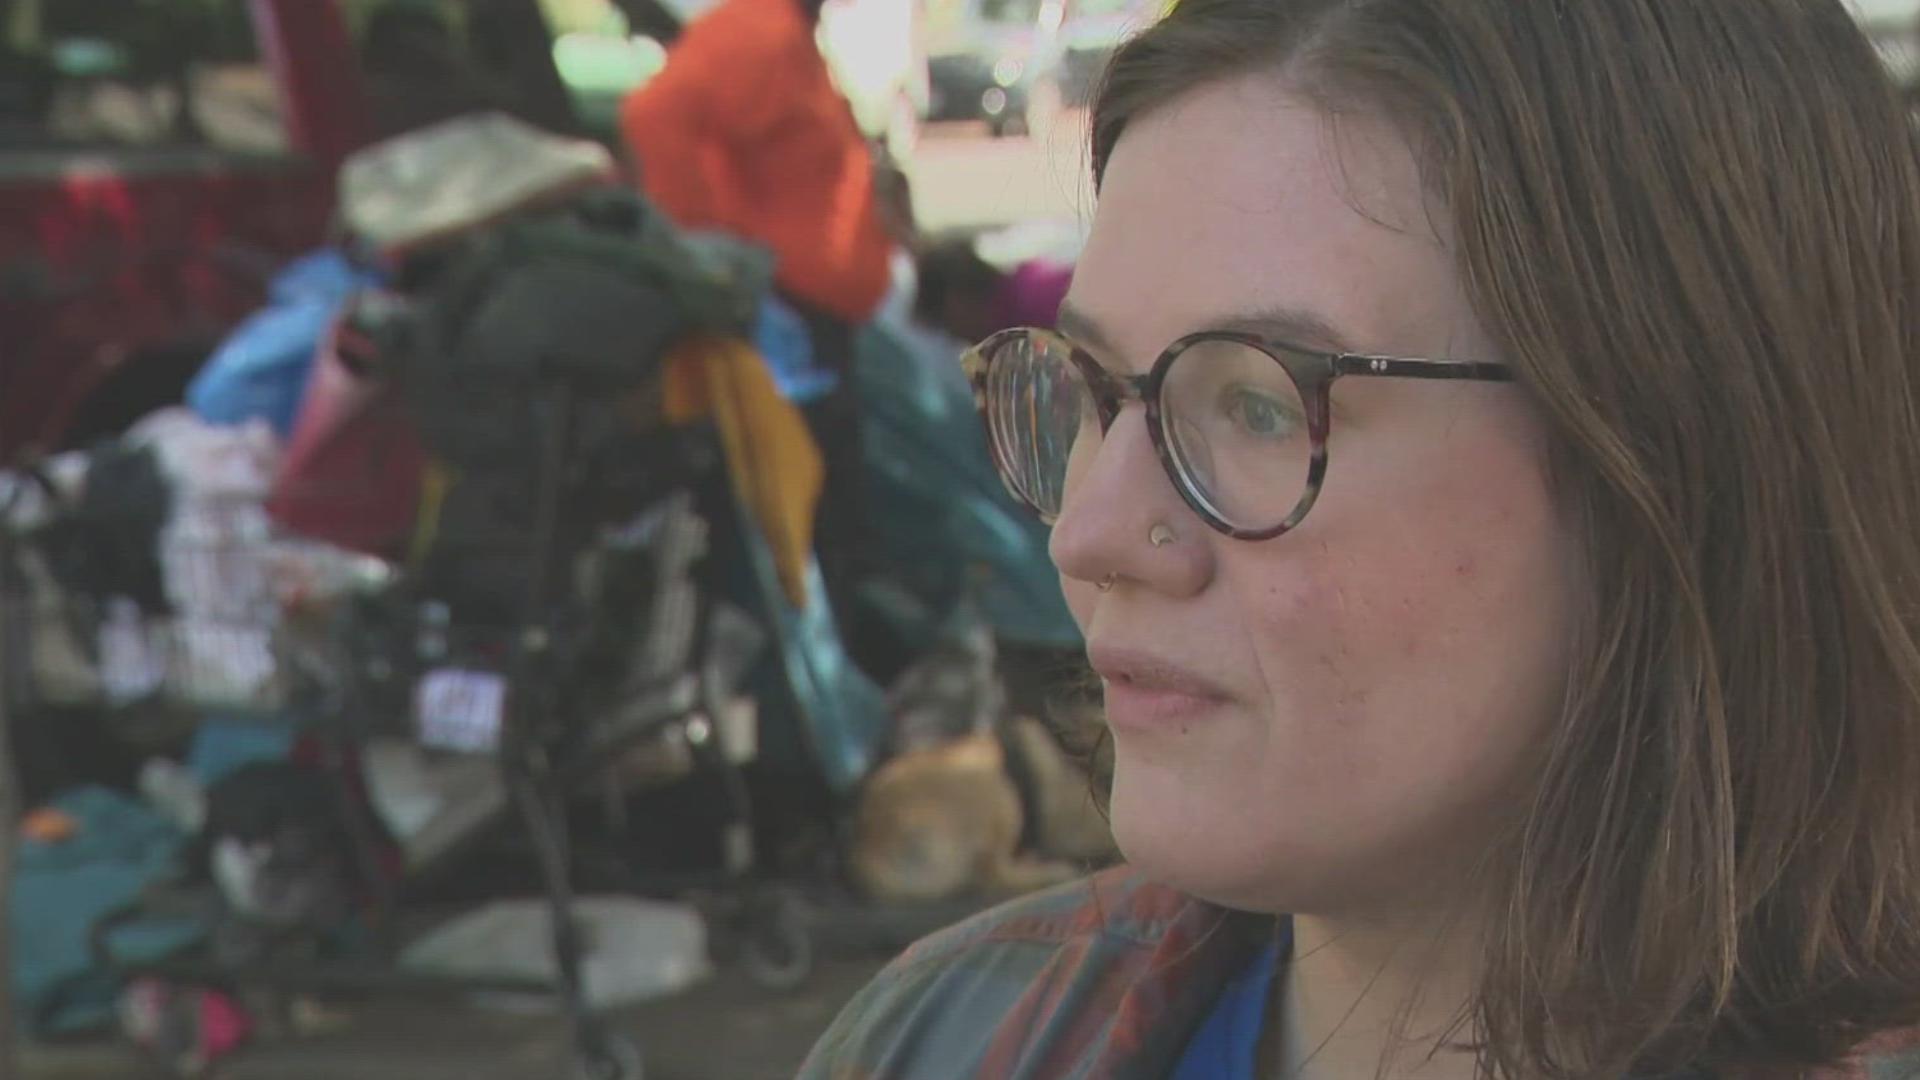 Homeless advocates say that the Supreme Court's ruling will eventually harm those living on the streets.